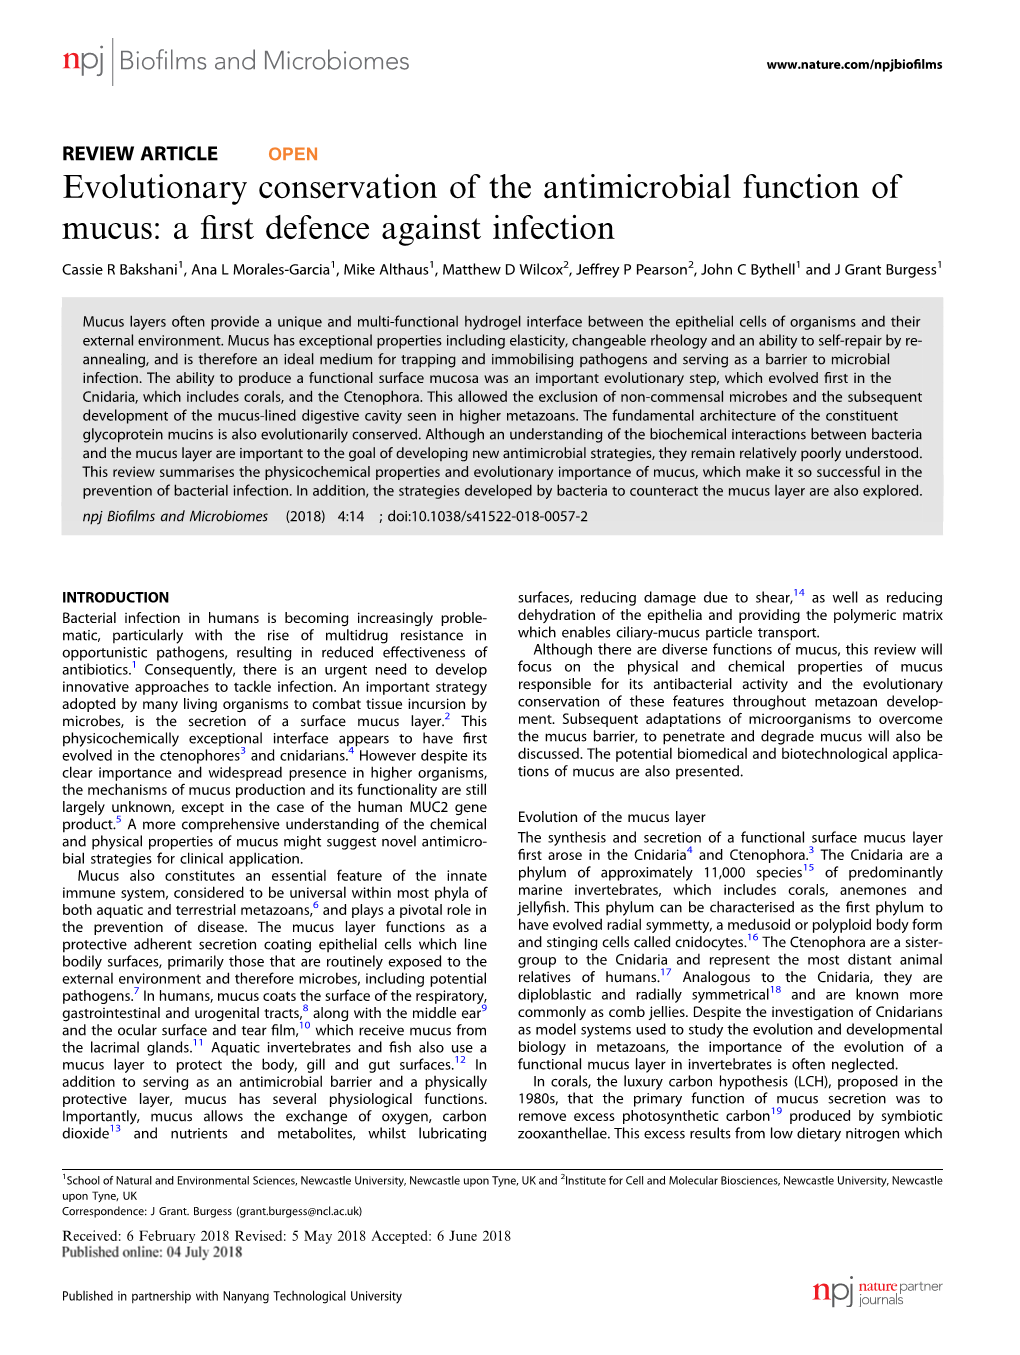 Evolutionary Conservation of the Antimicrobial Function of Mucus: a ﬁrst Defence Against Infection